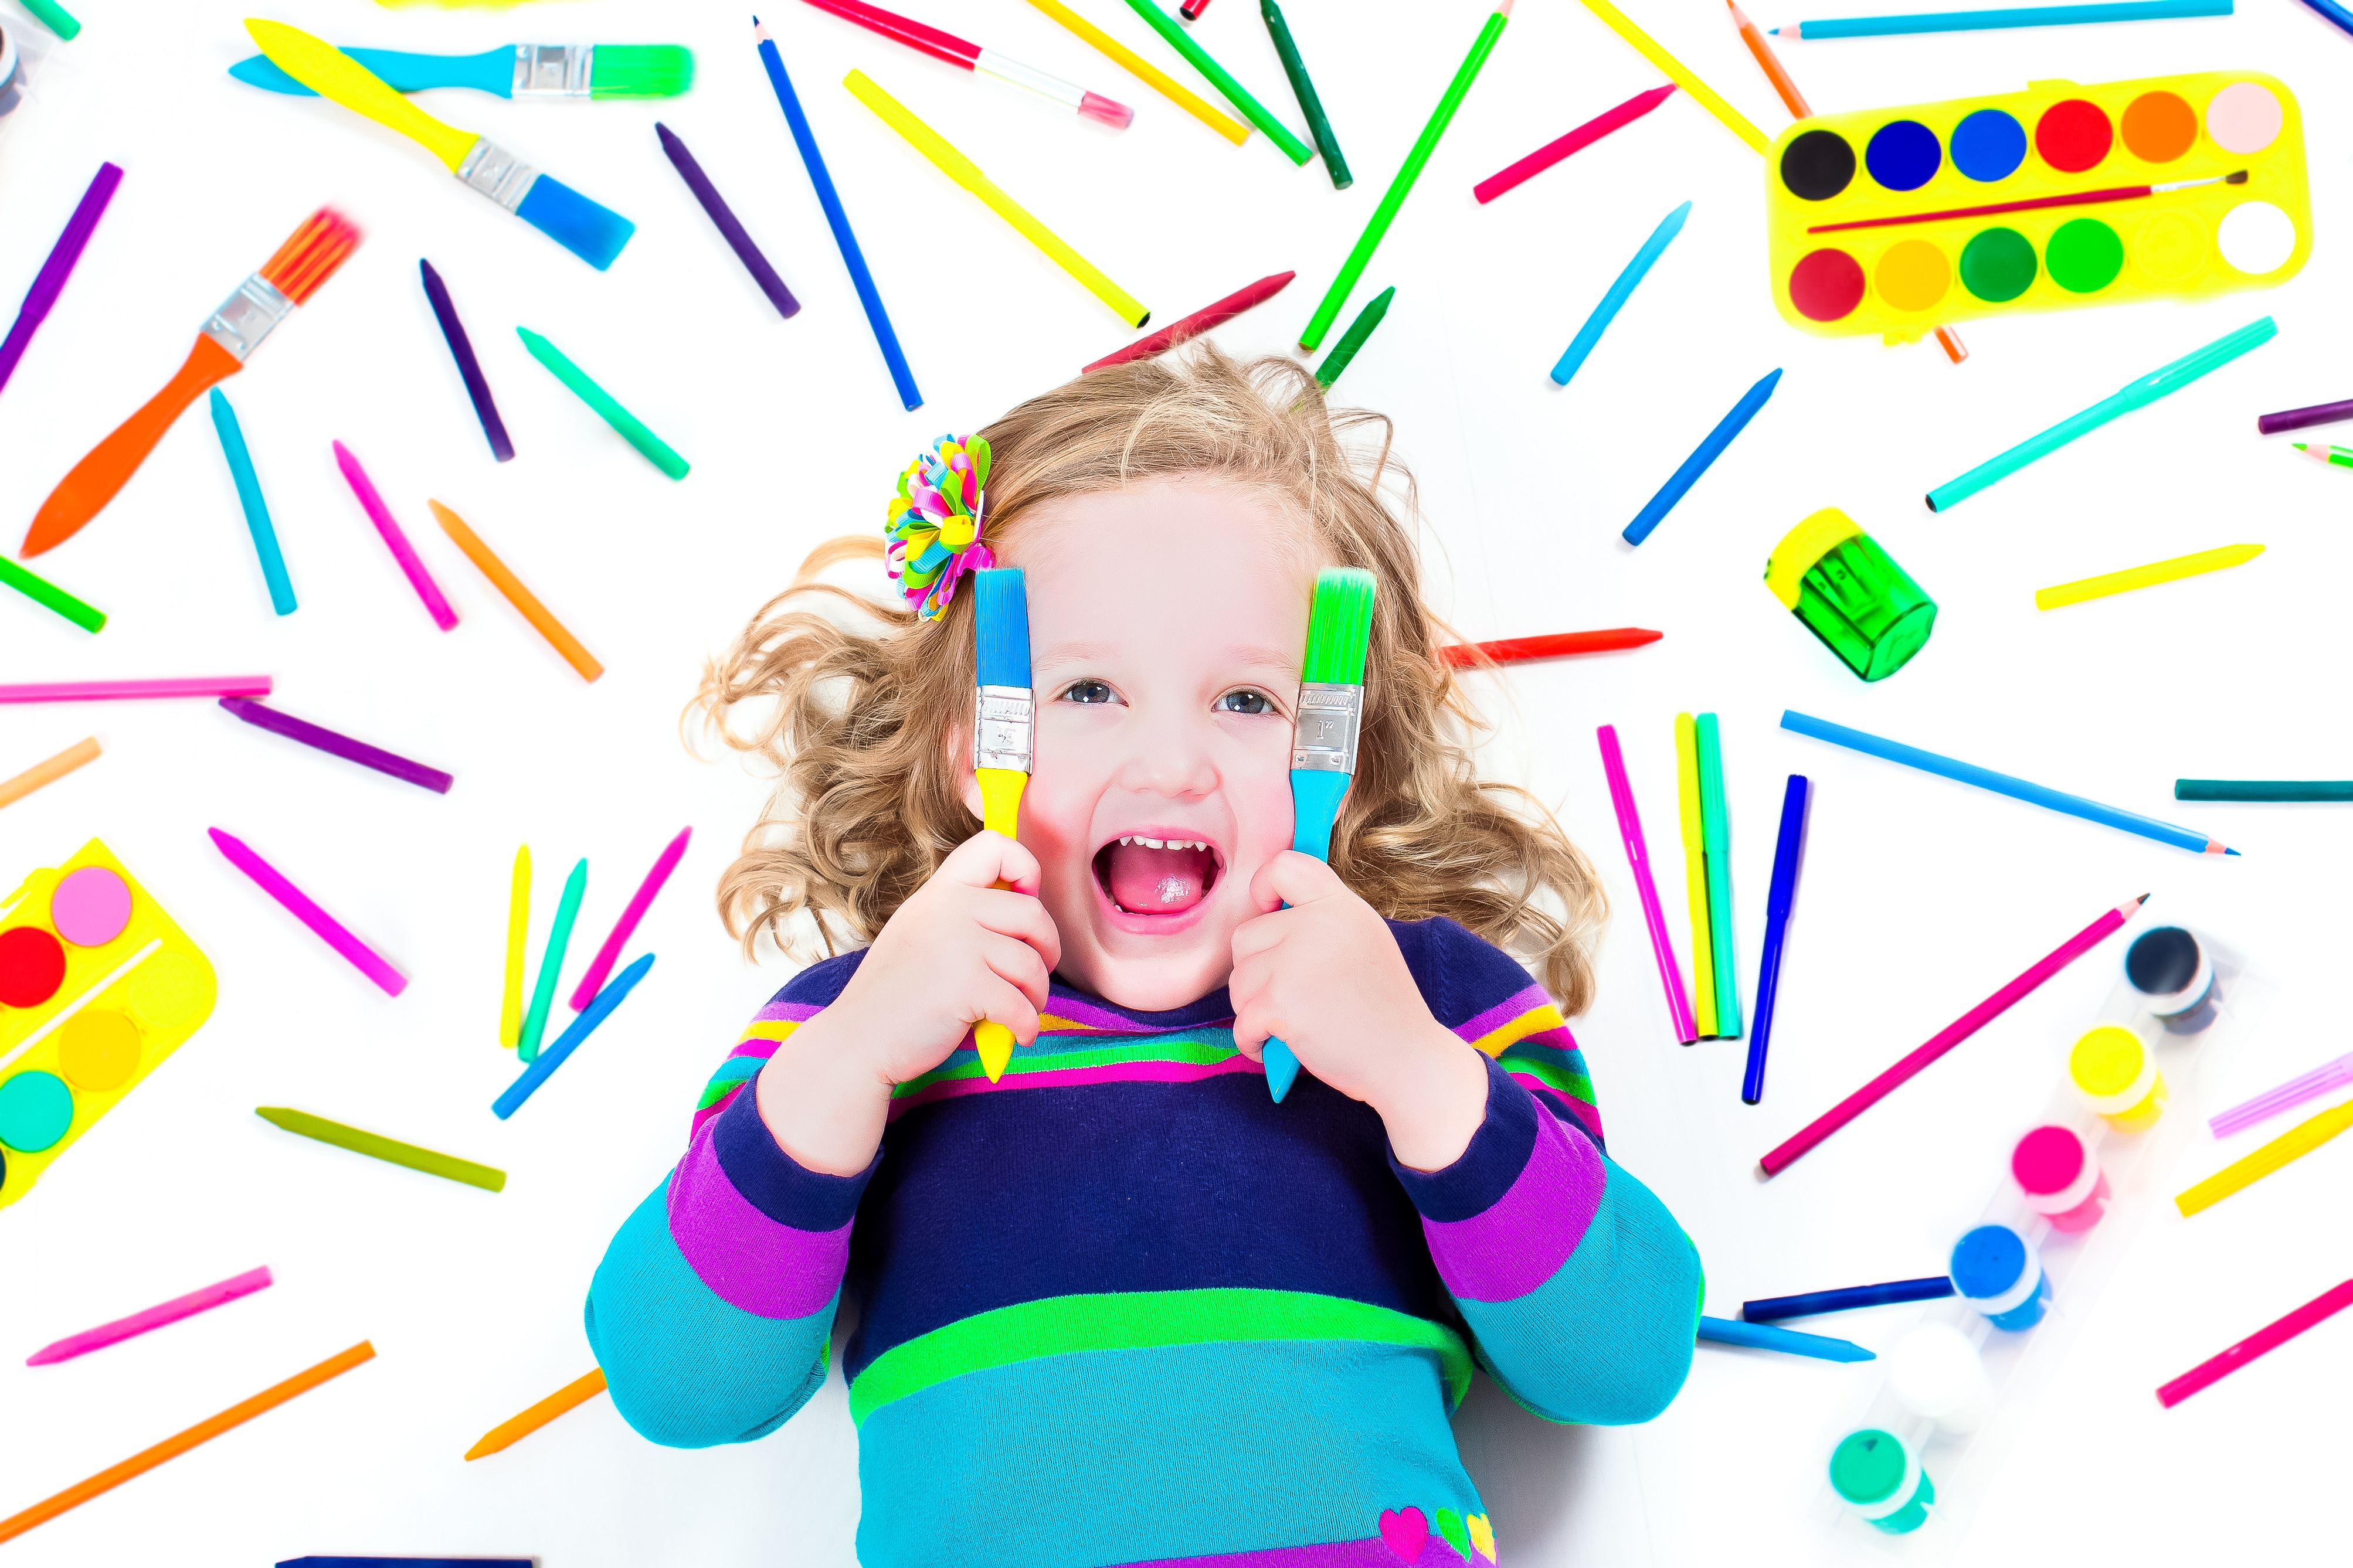 The Best Arts and Crafts Gifts for Kids | Fun top-rated art supplies for children, from toddlers to teens, who love crafts. These craft sets and kits are perfect for christmas, holiday or birthday gifts, or as a quiet time activity on a rainy day. Great for creative, artsy girls and boys!